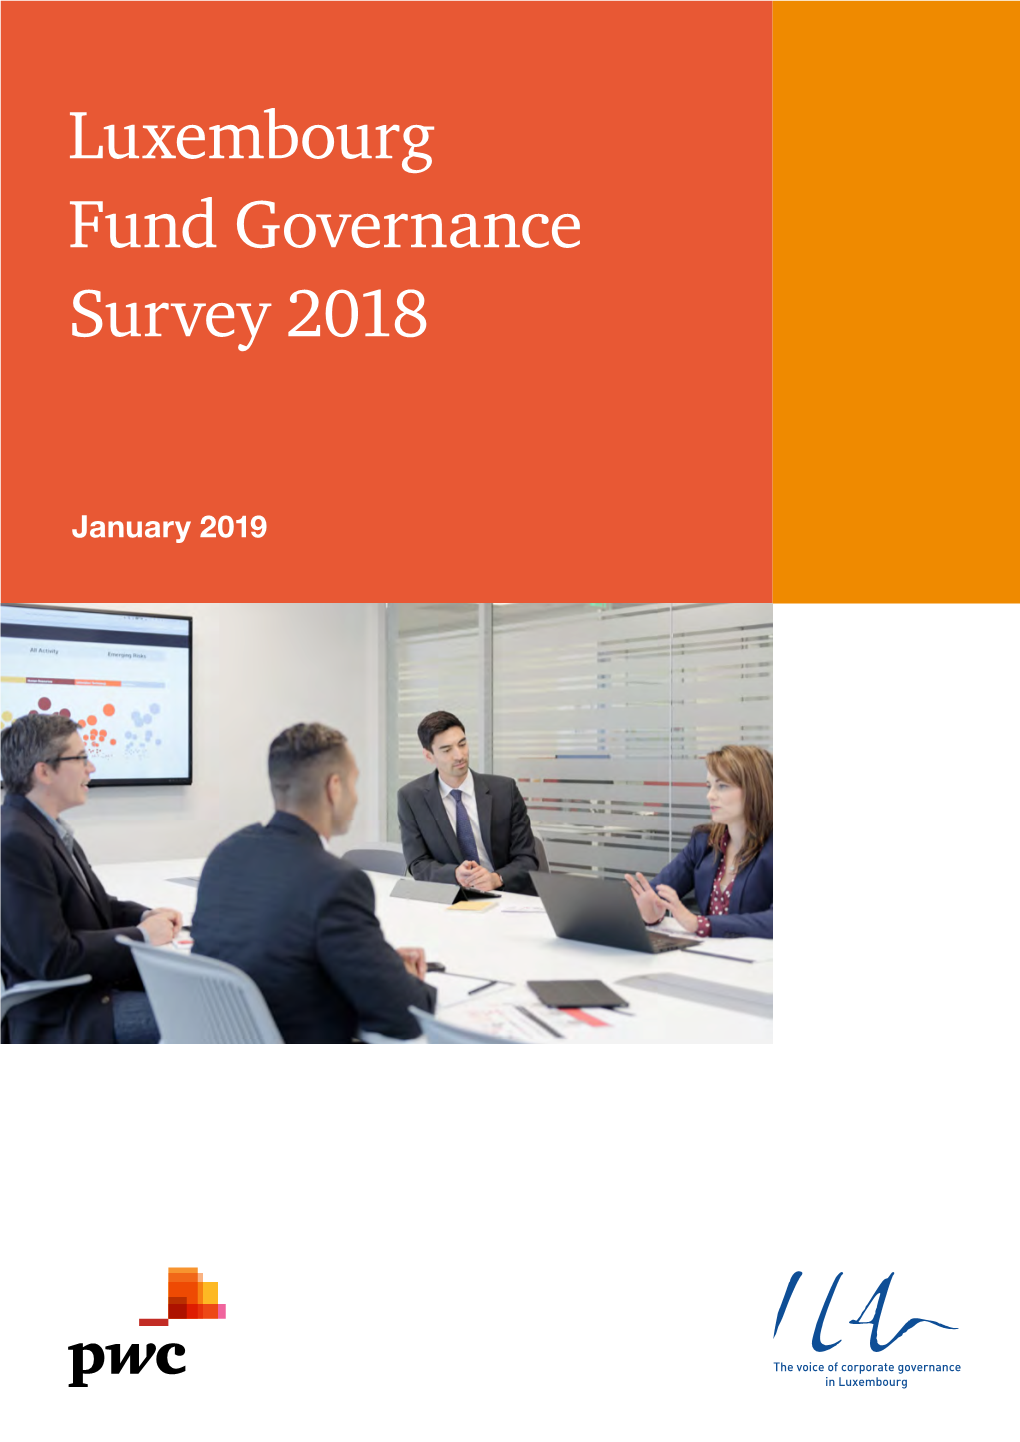 Luxembourg Fund Governance Survey 2018